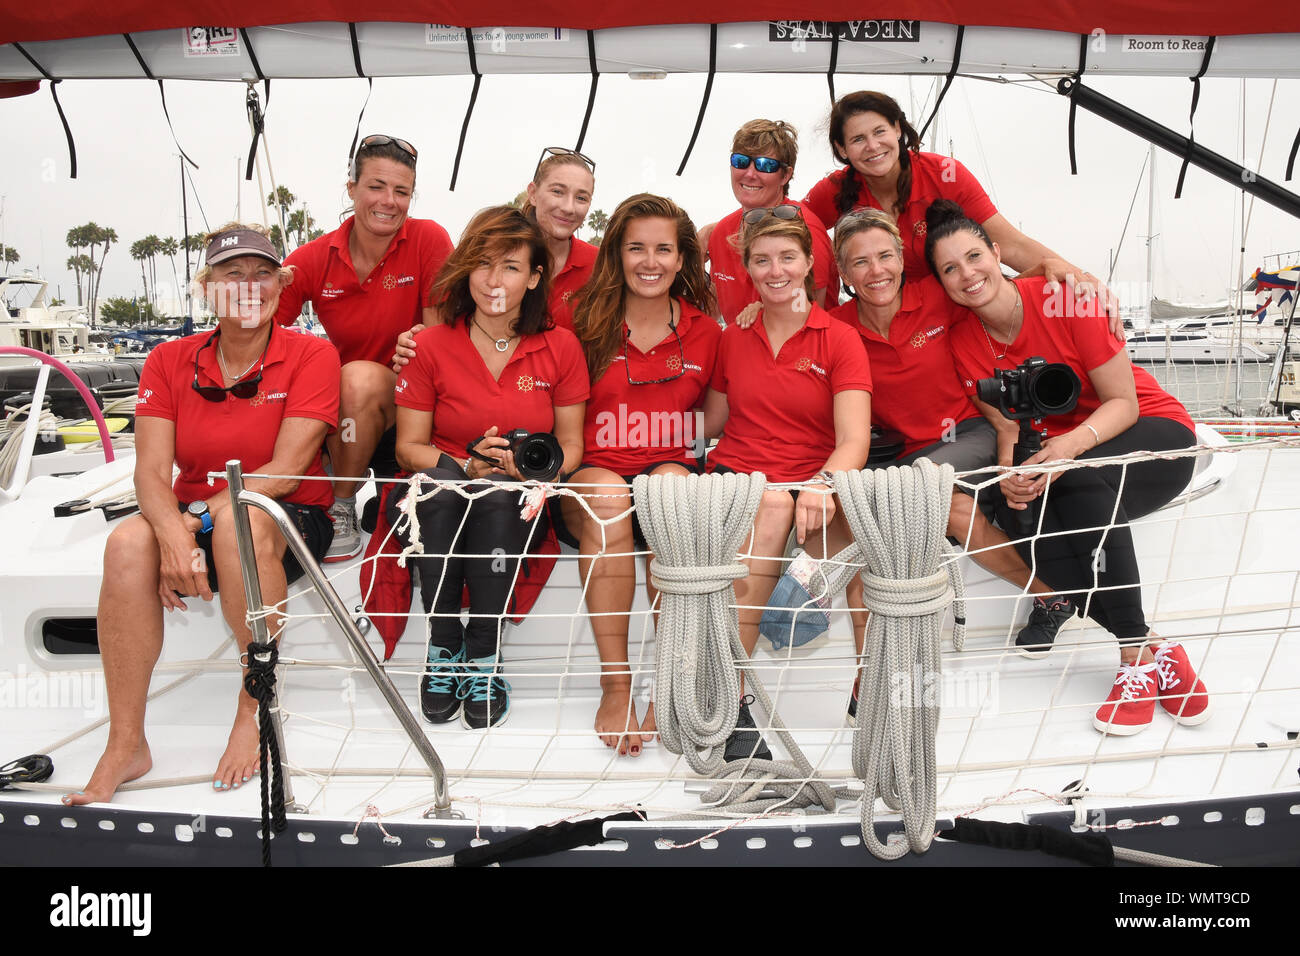 September 1, 2019, Marina Del Rey, California, USA: (L-R): Belle Henry, Sabrina Perell, Ash Perrin, Kellie Ann Taylor, Wendy Tuck, Amalia Infante, Courtney Koos, Erica Lush, Lindsay Rosen, Rachel Ross are the crew for The Maiden arriving at Marina del Rey for The Maiden Factor World for Tracy Edwards and for Girls' Education. (Credit Image: © Billy Bennight/ZUMA Wire) Stock Photo